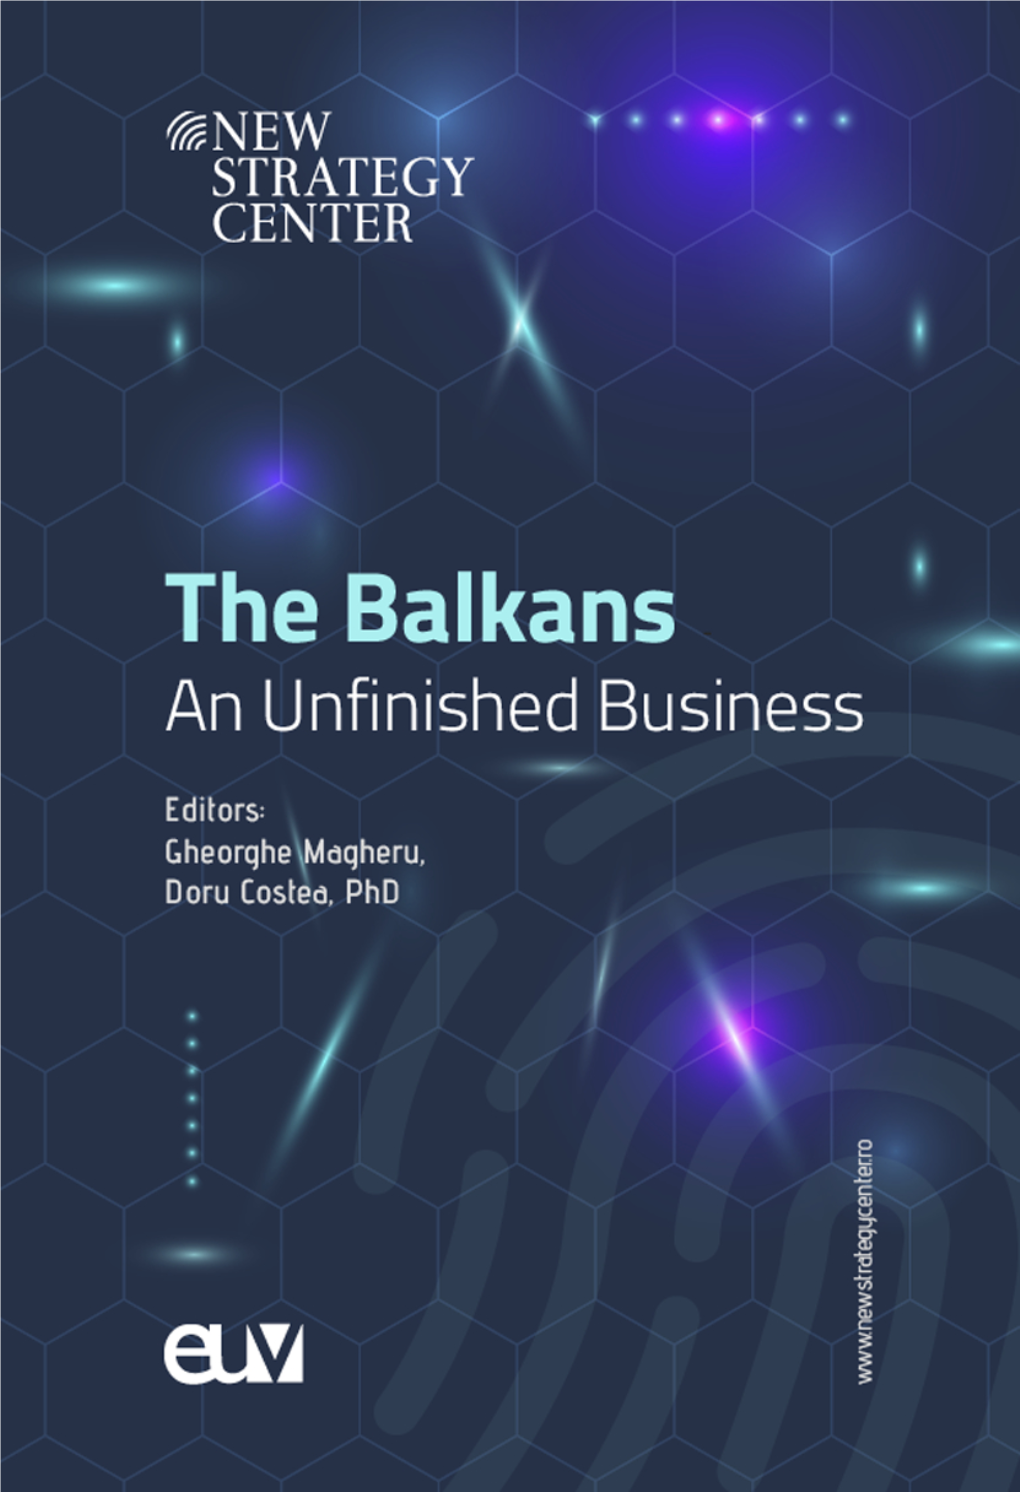 The Balkans an Unfinished Business